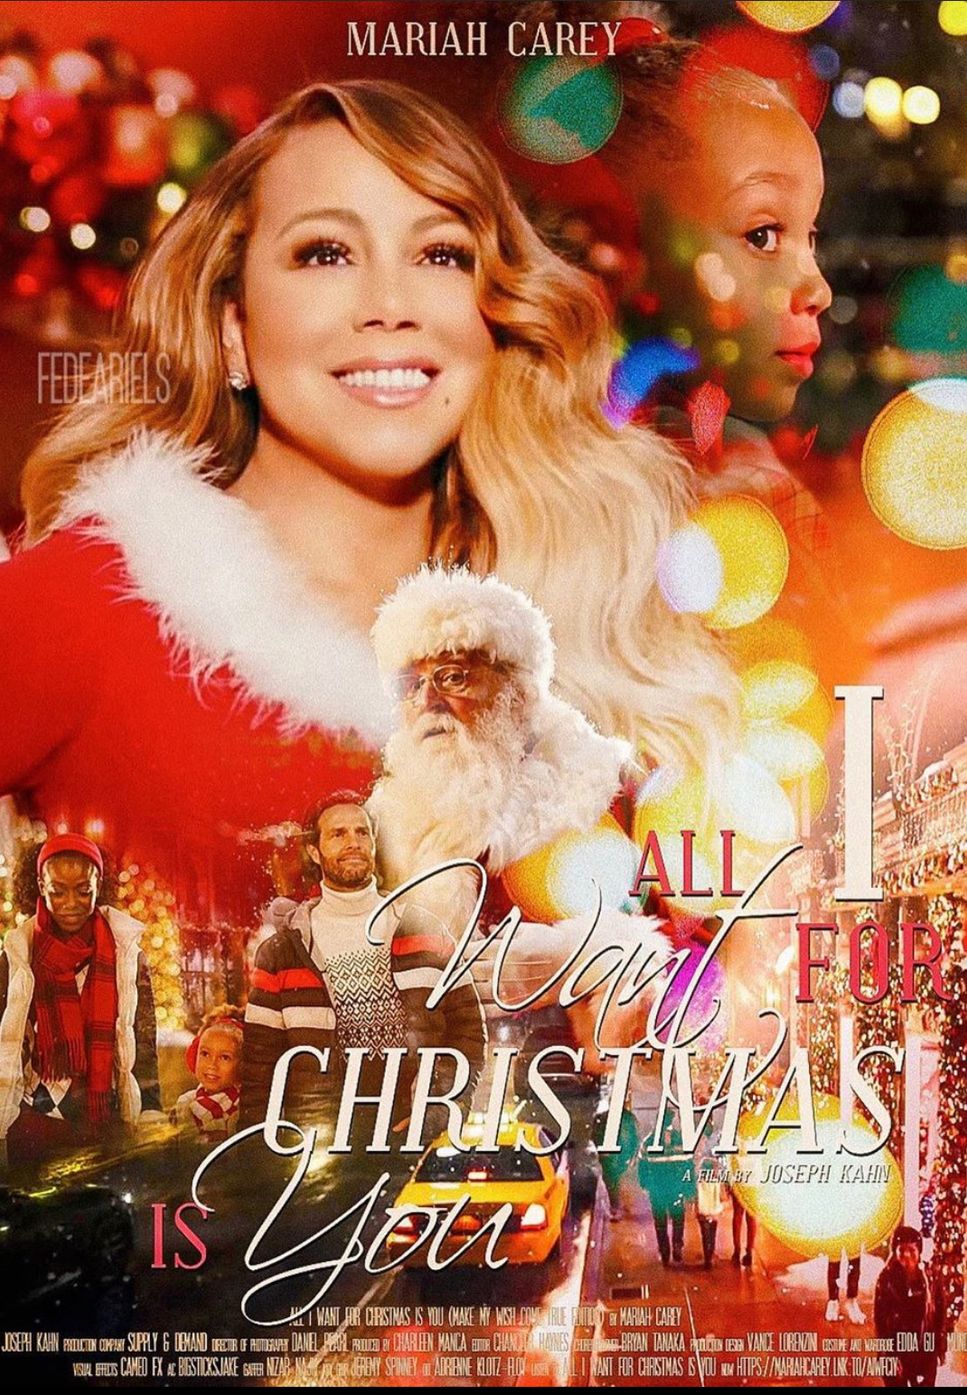 Mariah Carey - All I Want for Christmas Is You (with Lyrics) by ChansMusic